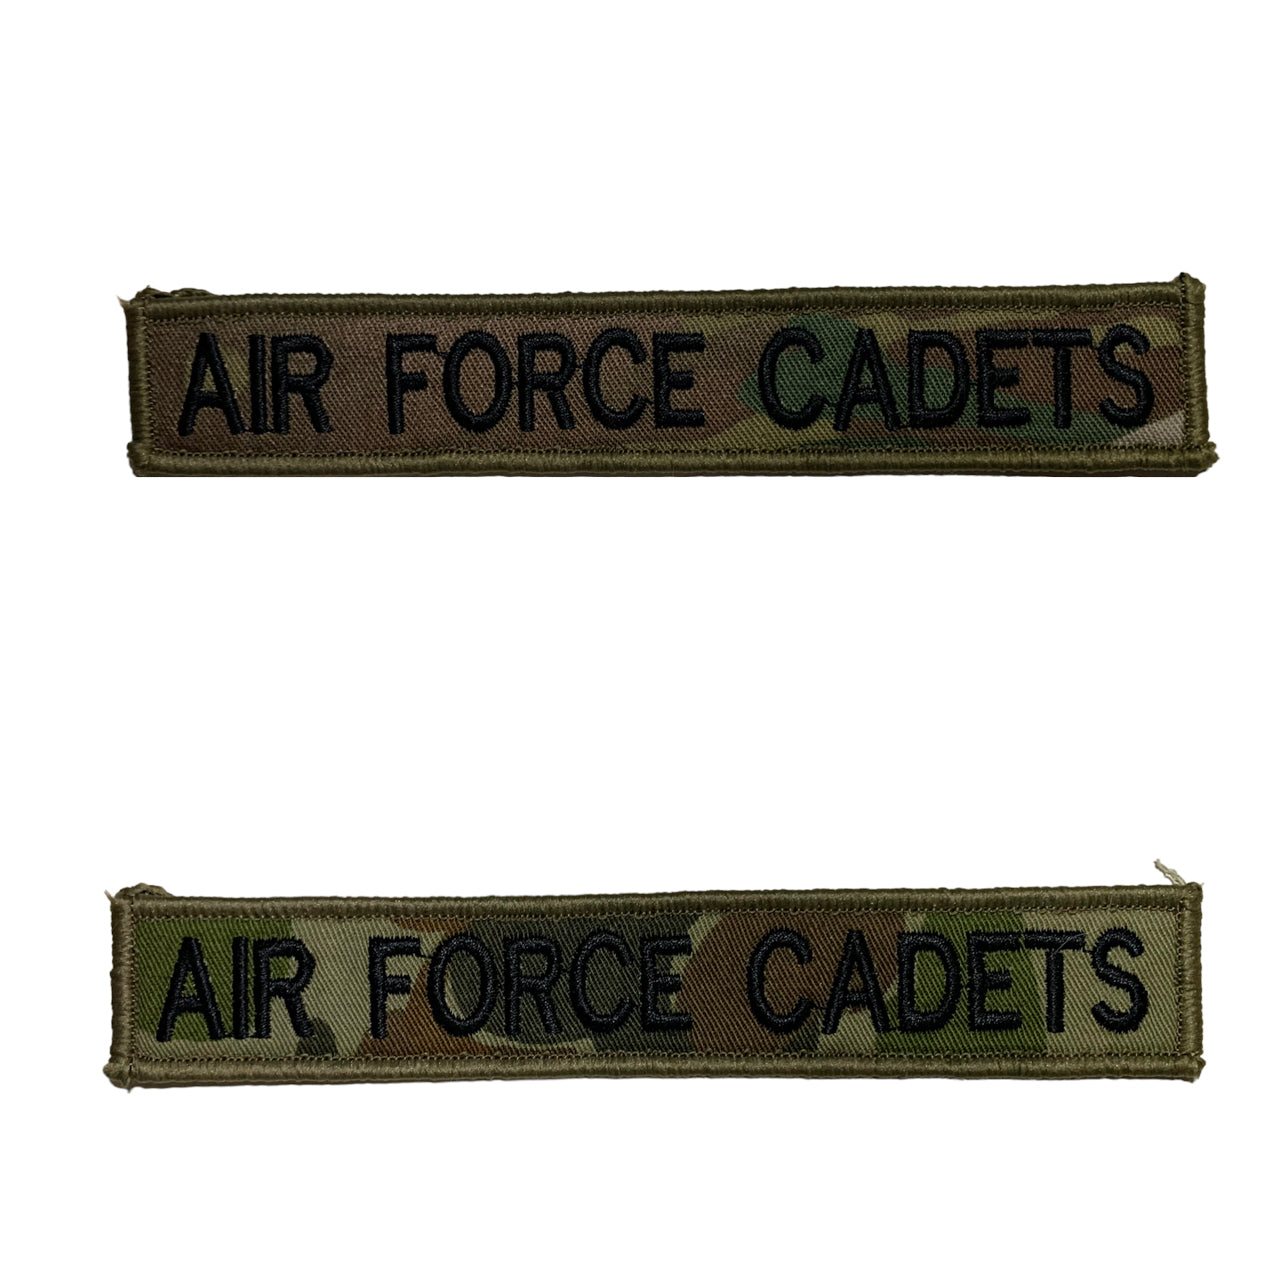 Air Force Cadets Patch in various colours for a bit of fun.  Some units are still using auscam, others are using GPU but we had the idea to come up with a range of fun options as well.   Size is 2.5cm x 15cm, lettering is 1.5cm in height.  All embroidery is done in upper case letters only as a FYI. www.defenceqstore.com.au